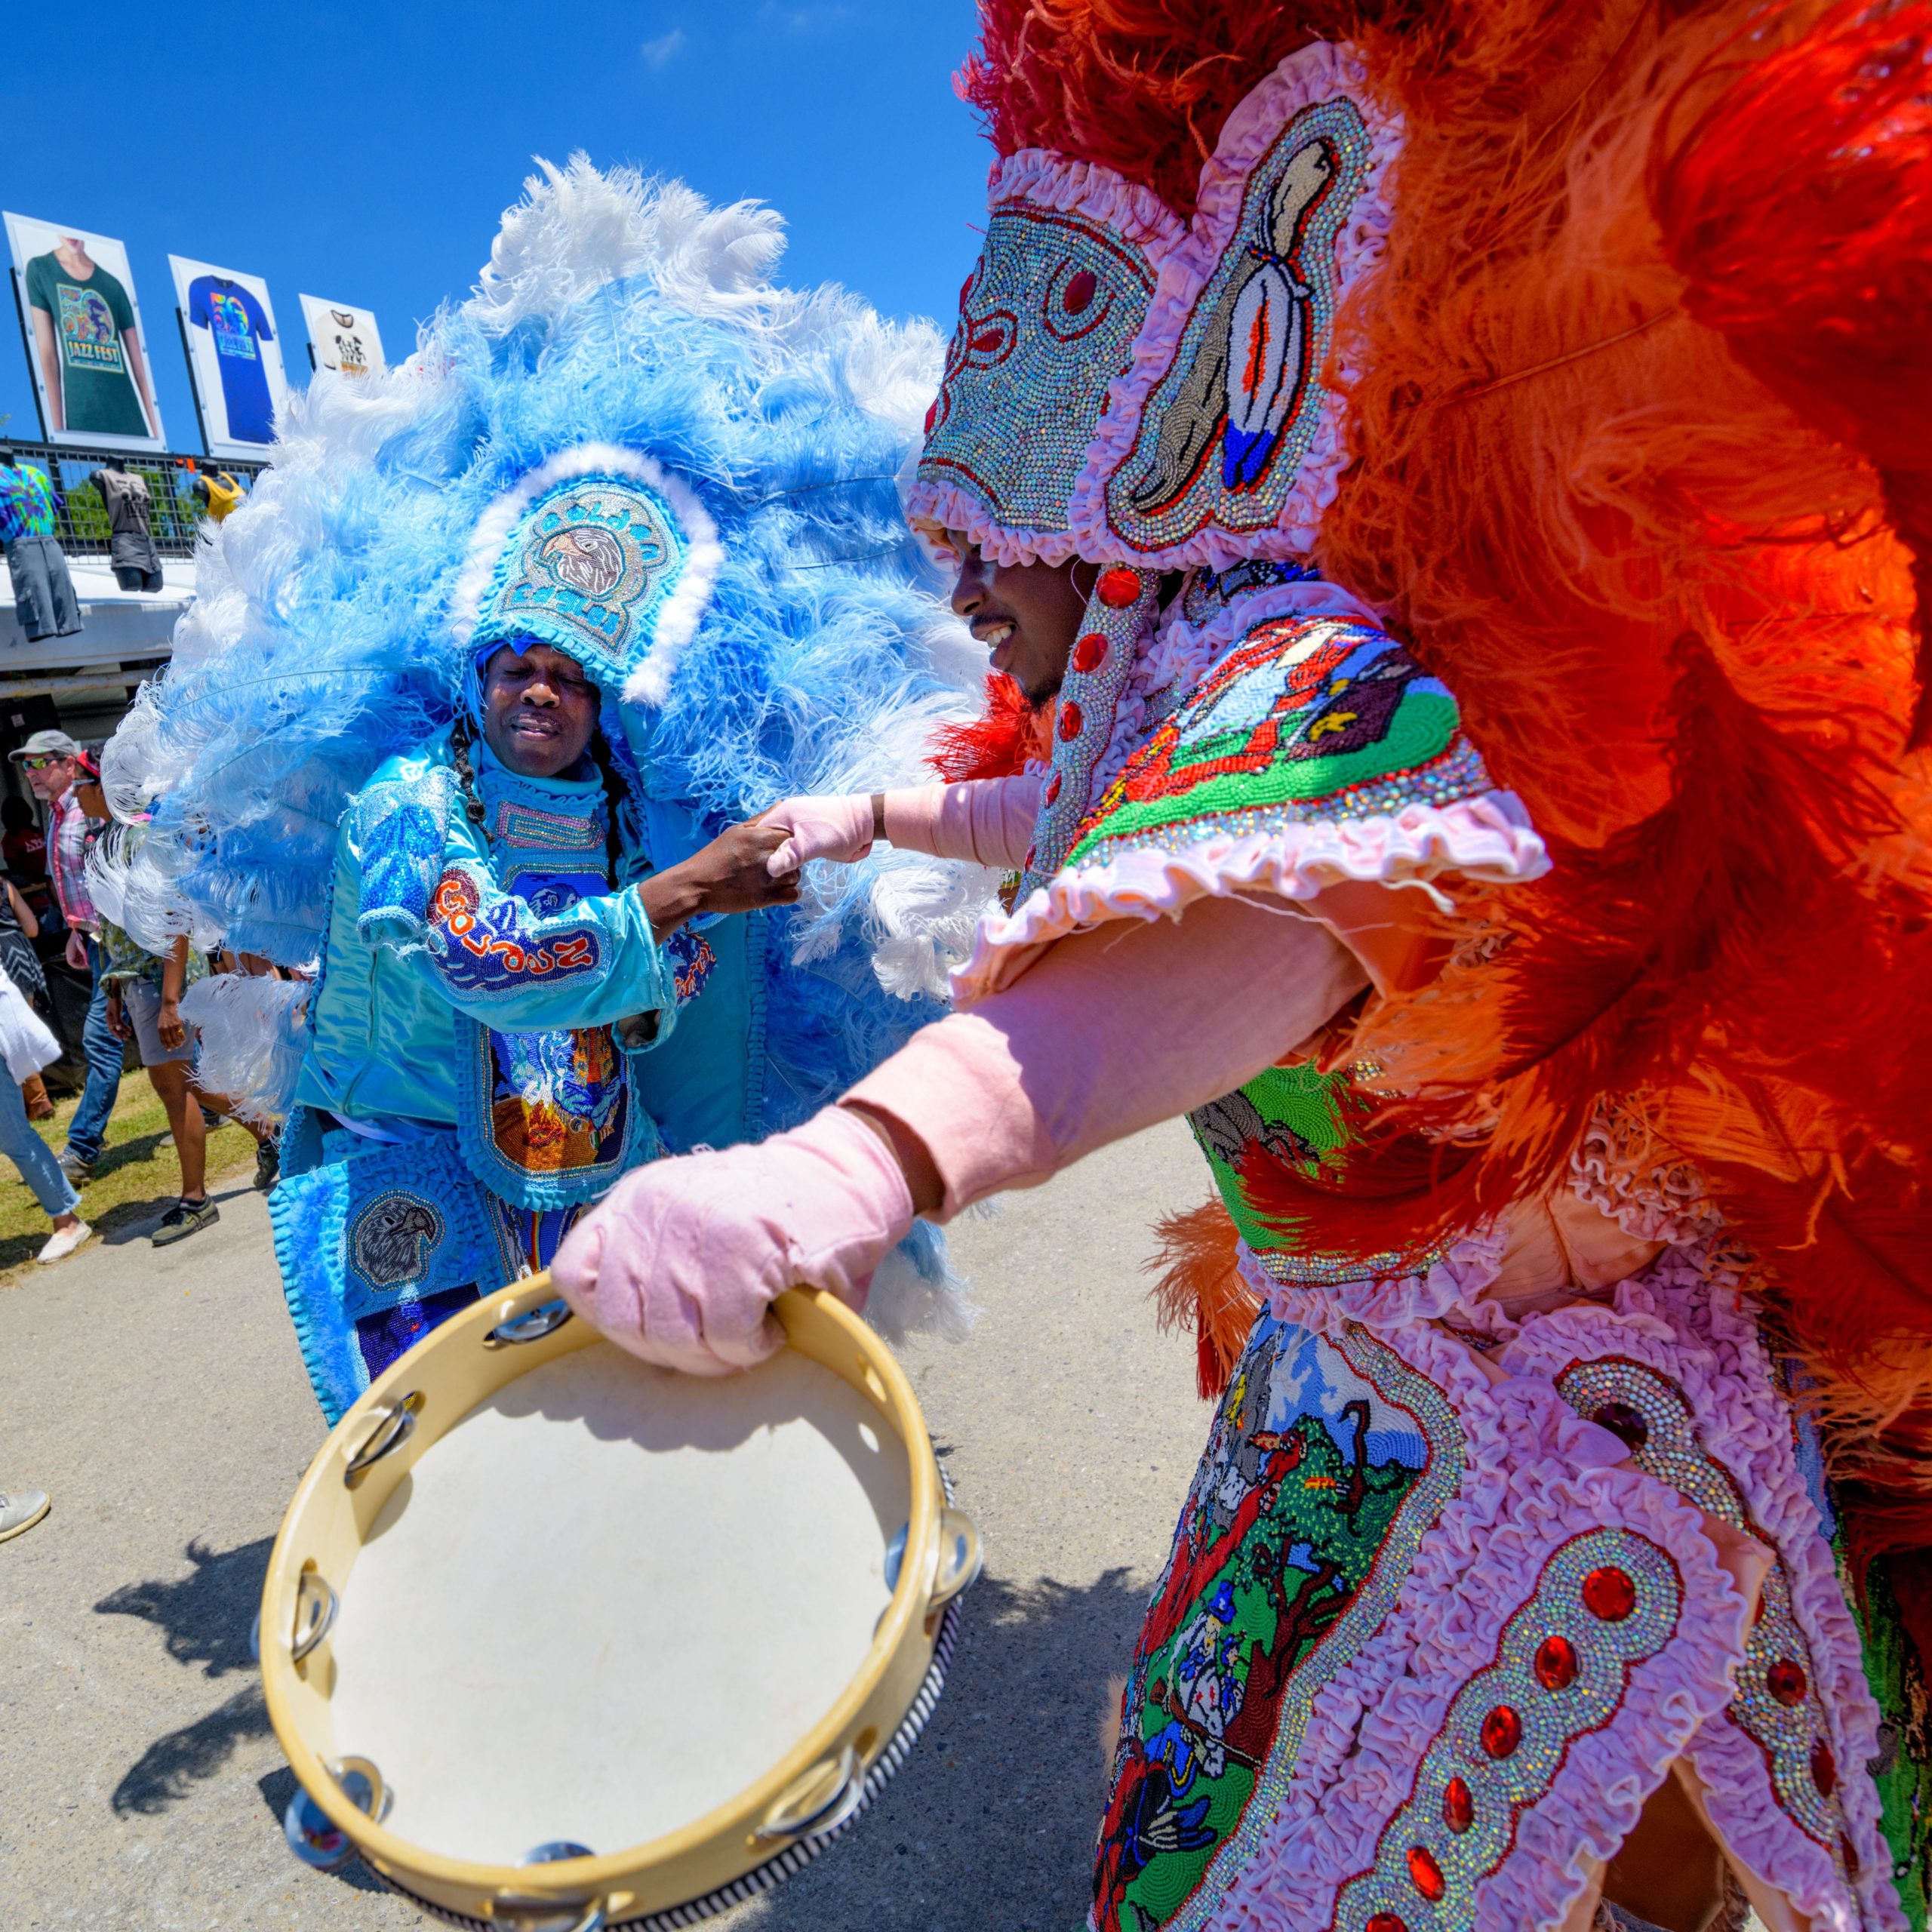 Big Chief Joseph Boudreaux, Jr. and the Young Golden Eagles parade during the 50th New Orleans Jazz and Heritage Festival at the Fair Grounds in New Orleans, La. Sunday, April 28, 2019. Photo by Matthew Hinton